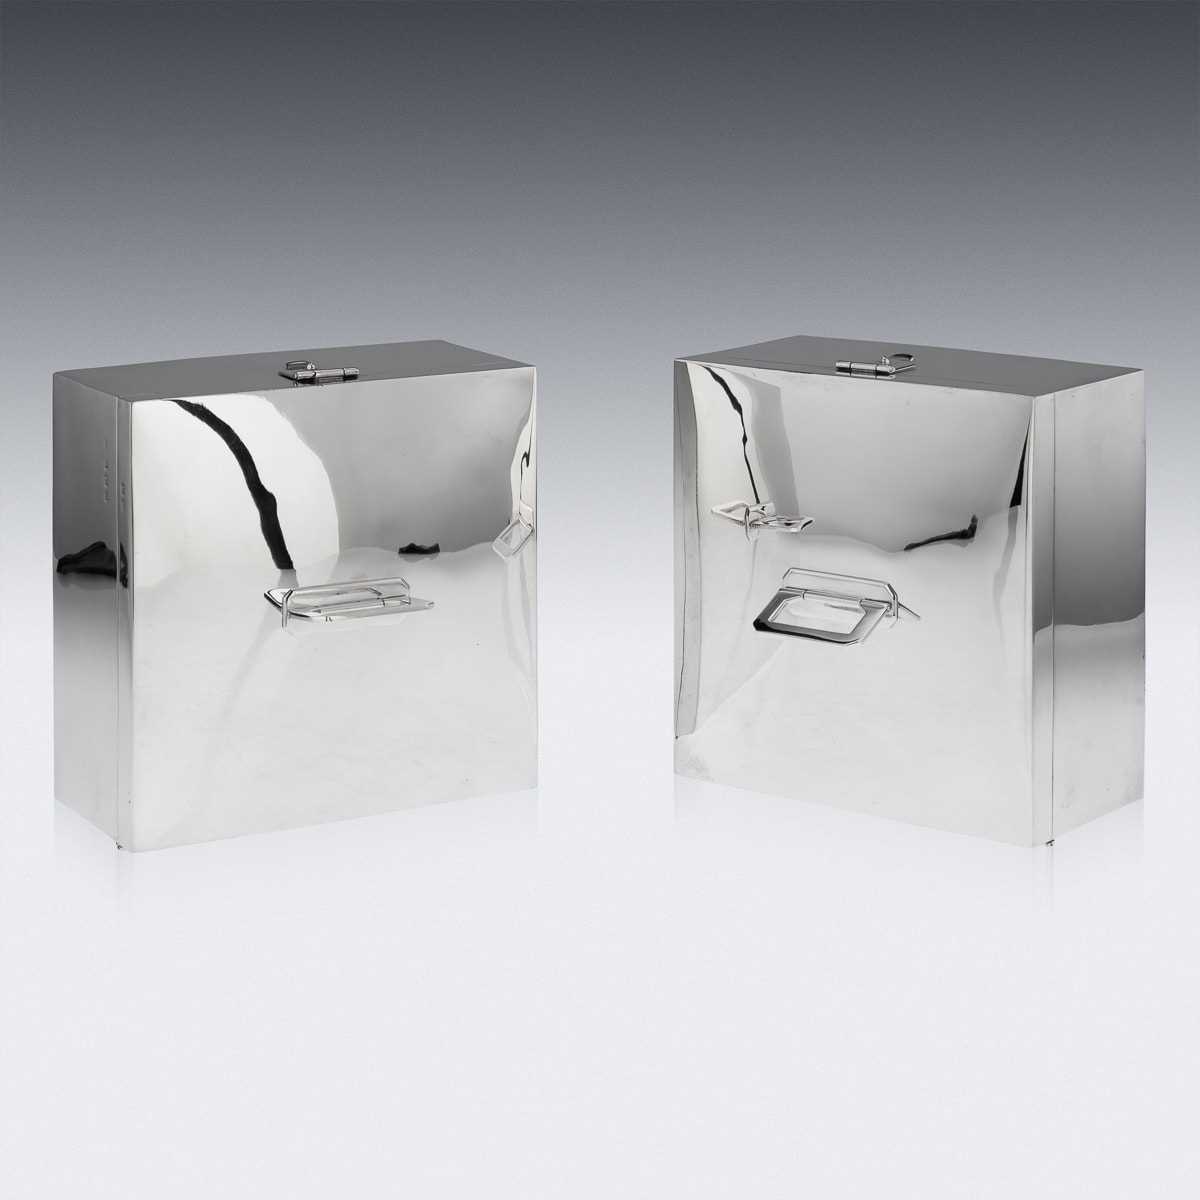 ASPREY & CO. : A PAIR OF STERLING SILVER ART DECO CIGAR BOXES, C. 1936 - Image 7 of 14